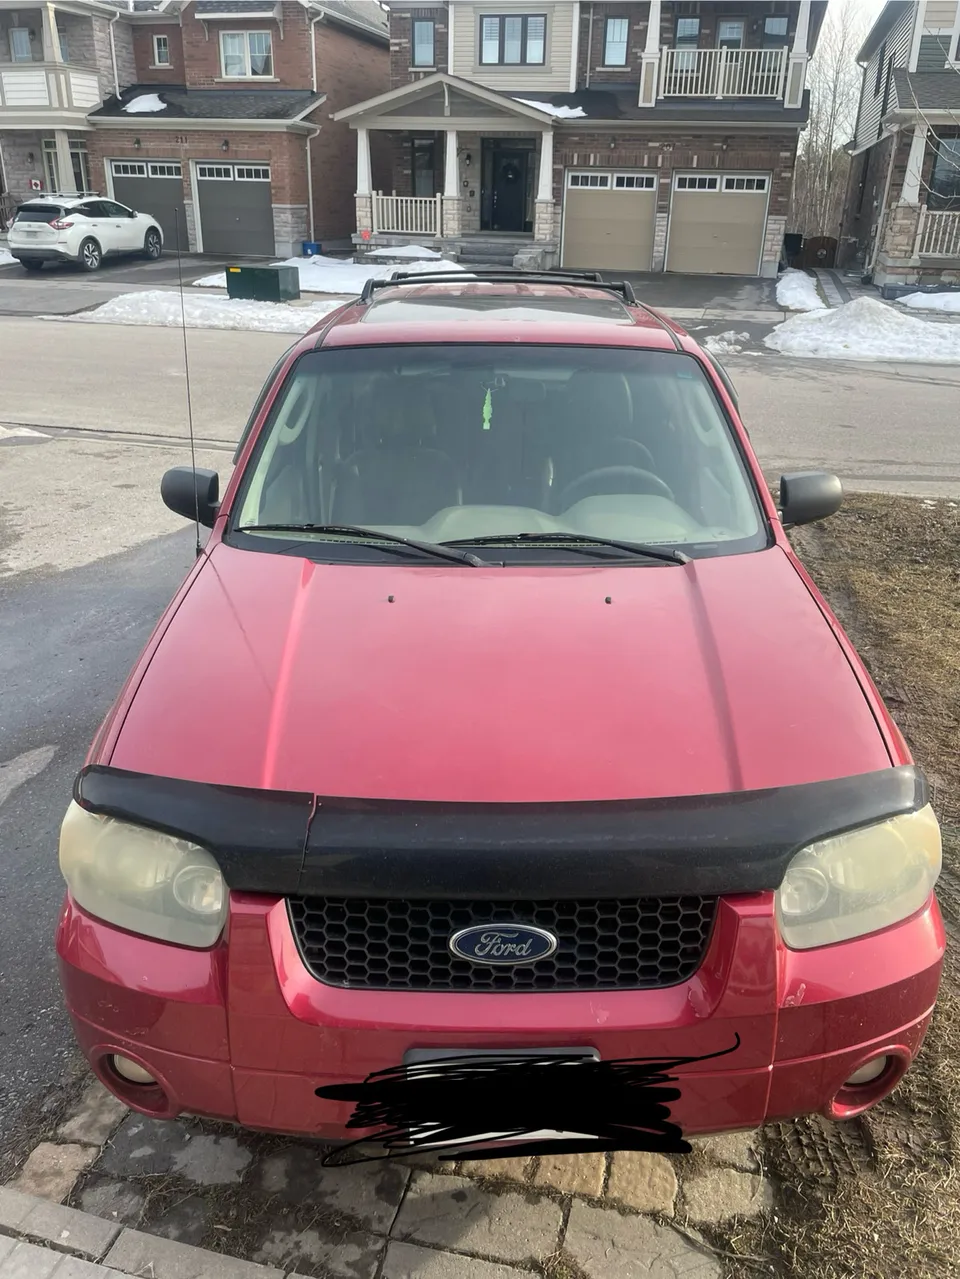 Ford Escape 2007 - Works Great